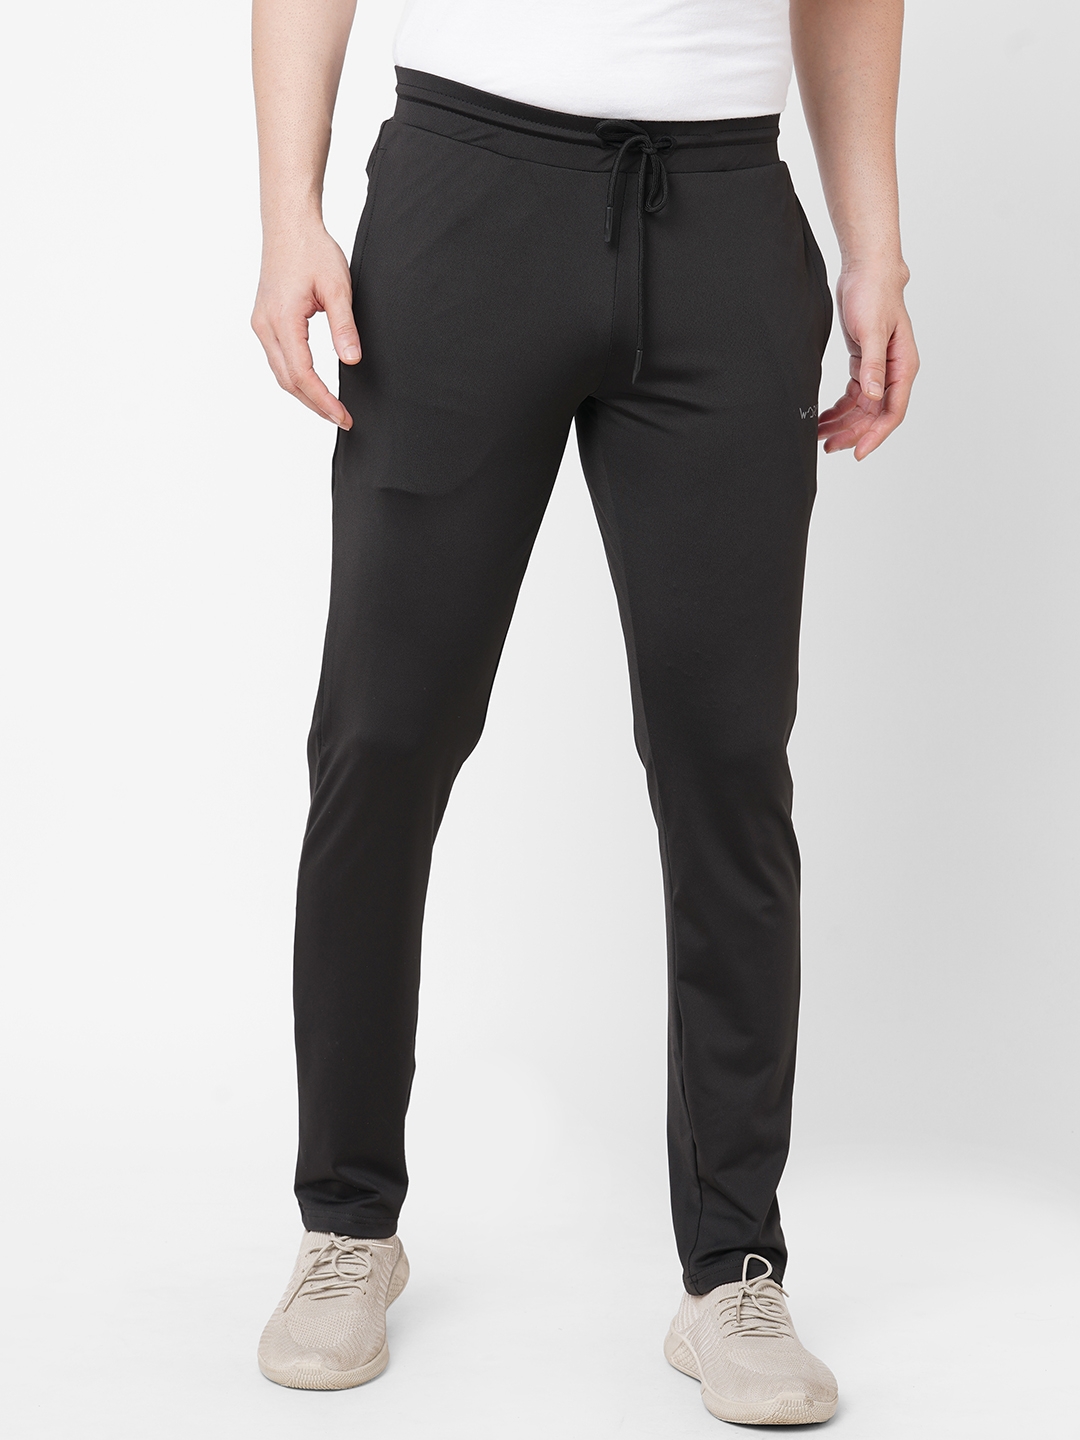 VAPOR SPORTS Black Polyester Lycra Trackpants - Buy VAPOR SPORTS Black  Polyester Lycra Trackpants Online at Best Prices in India on Snapdeal